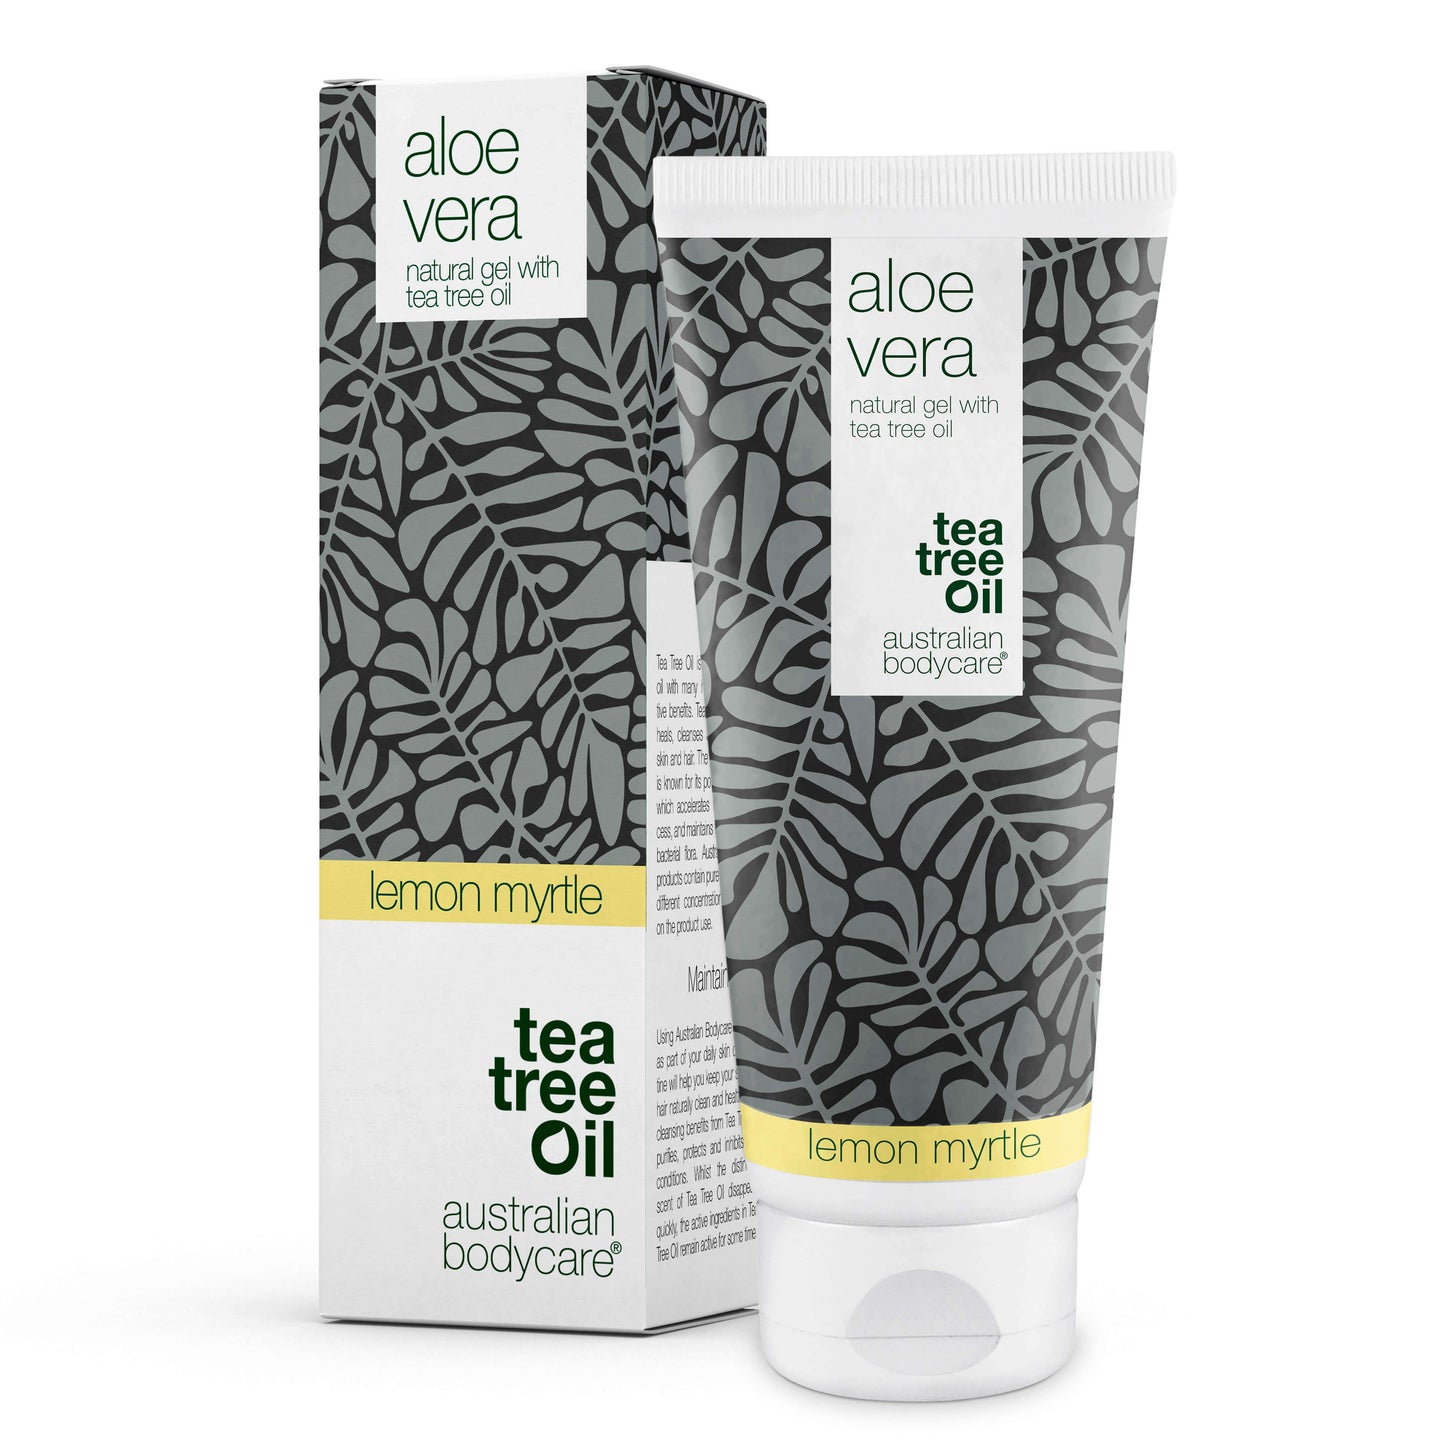 Aloe vera gel for sunburn, burning sensation and itching - Cooling gel to relieve irritated, itchy skin, sunburn and scratches